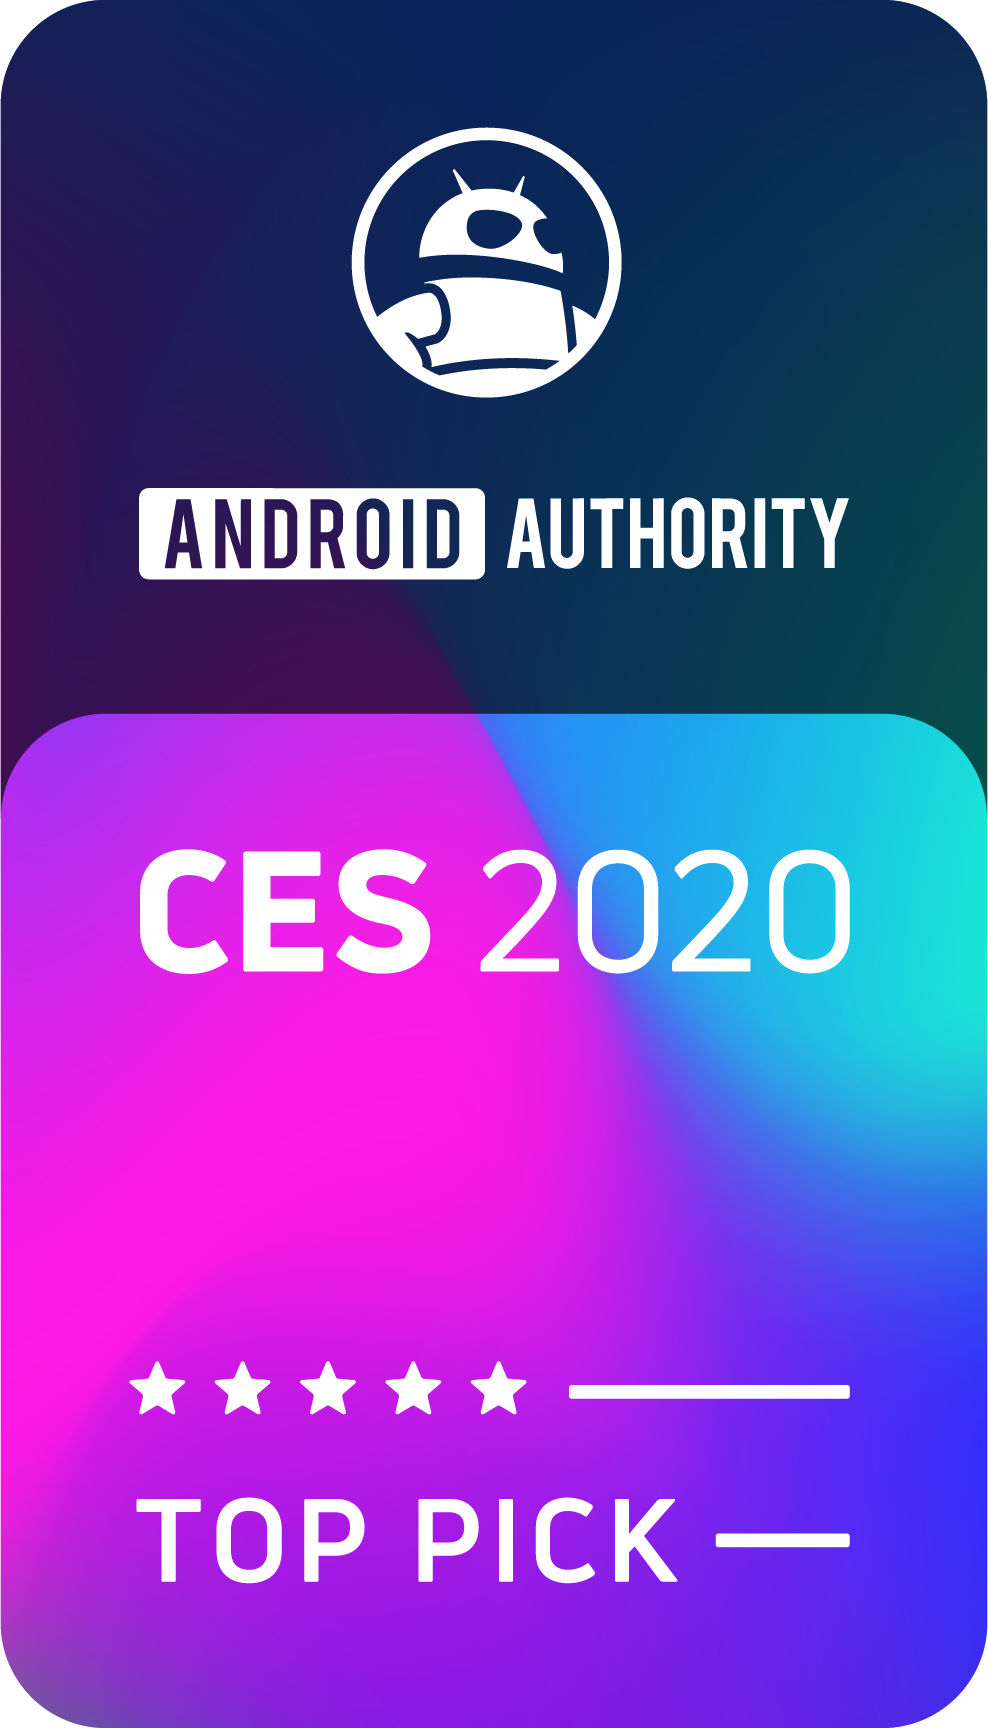 Android Authority CES 2020 Top Pick award badge